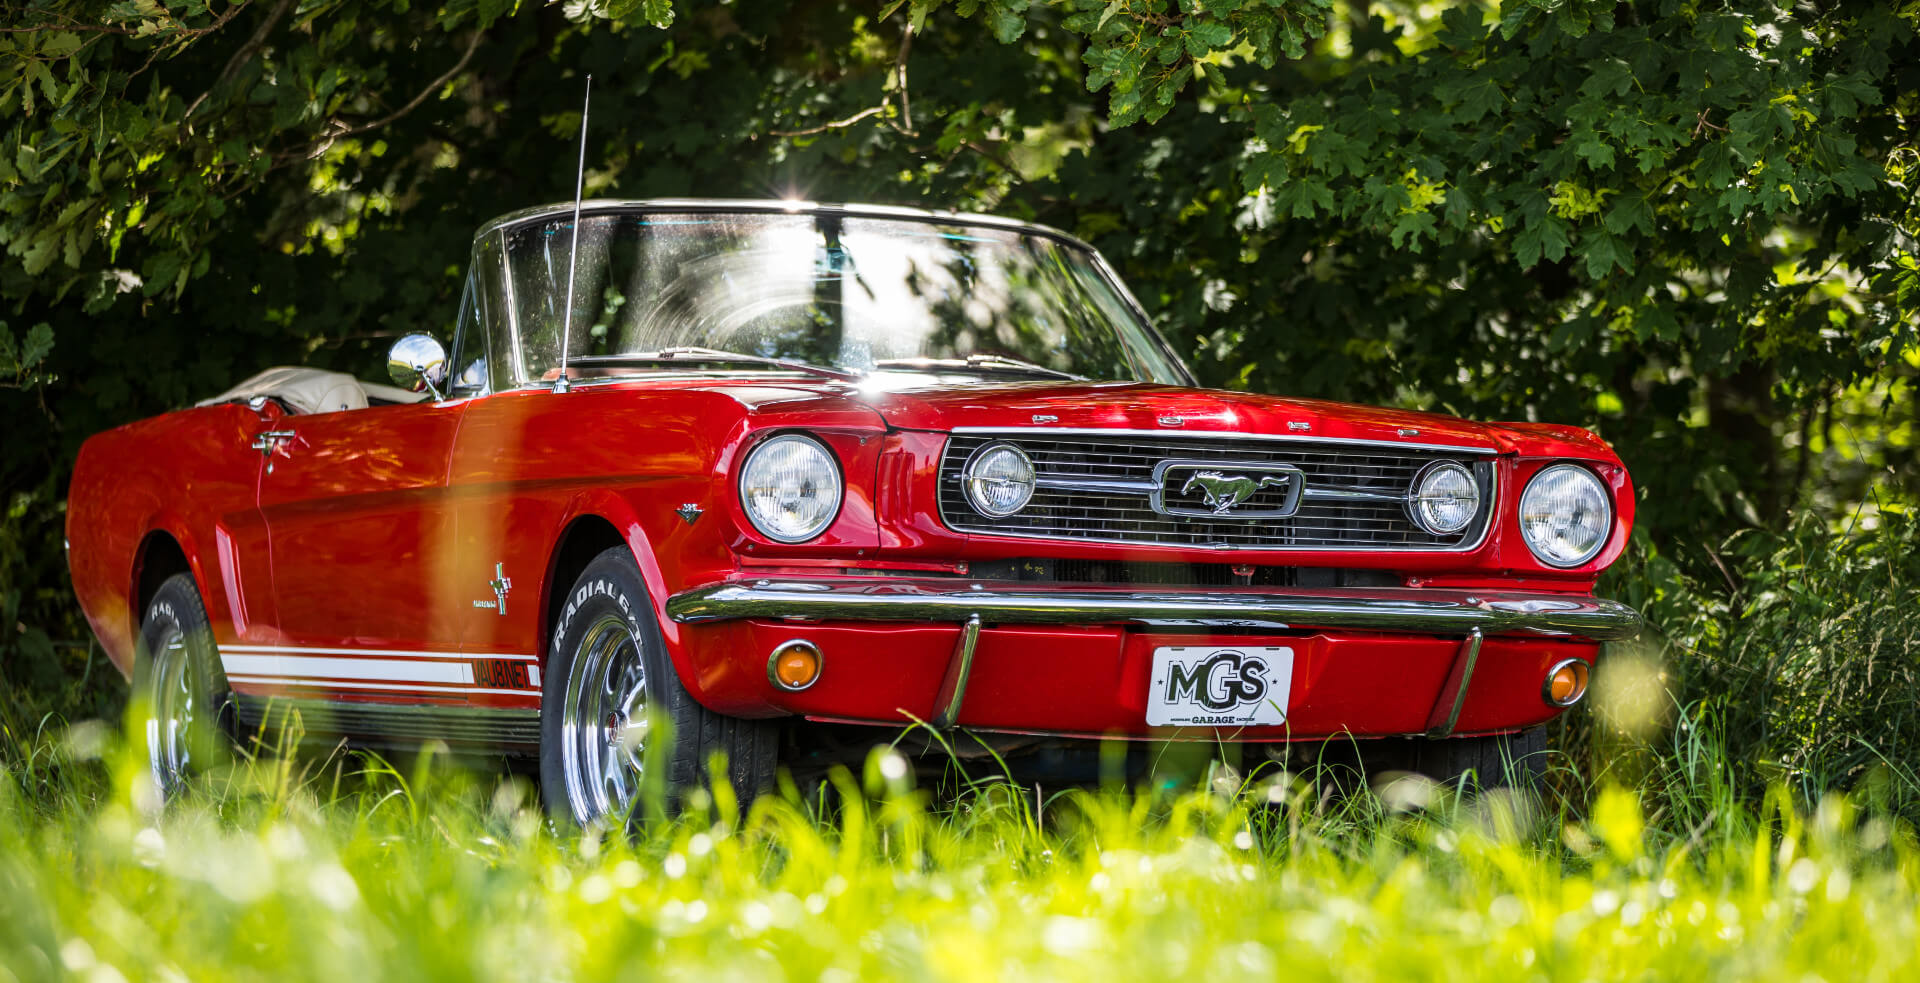 1966er Ford Mustang Cabrio in candyapplered